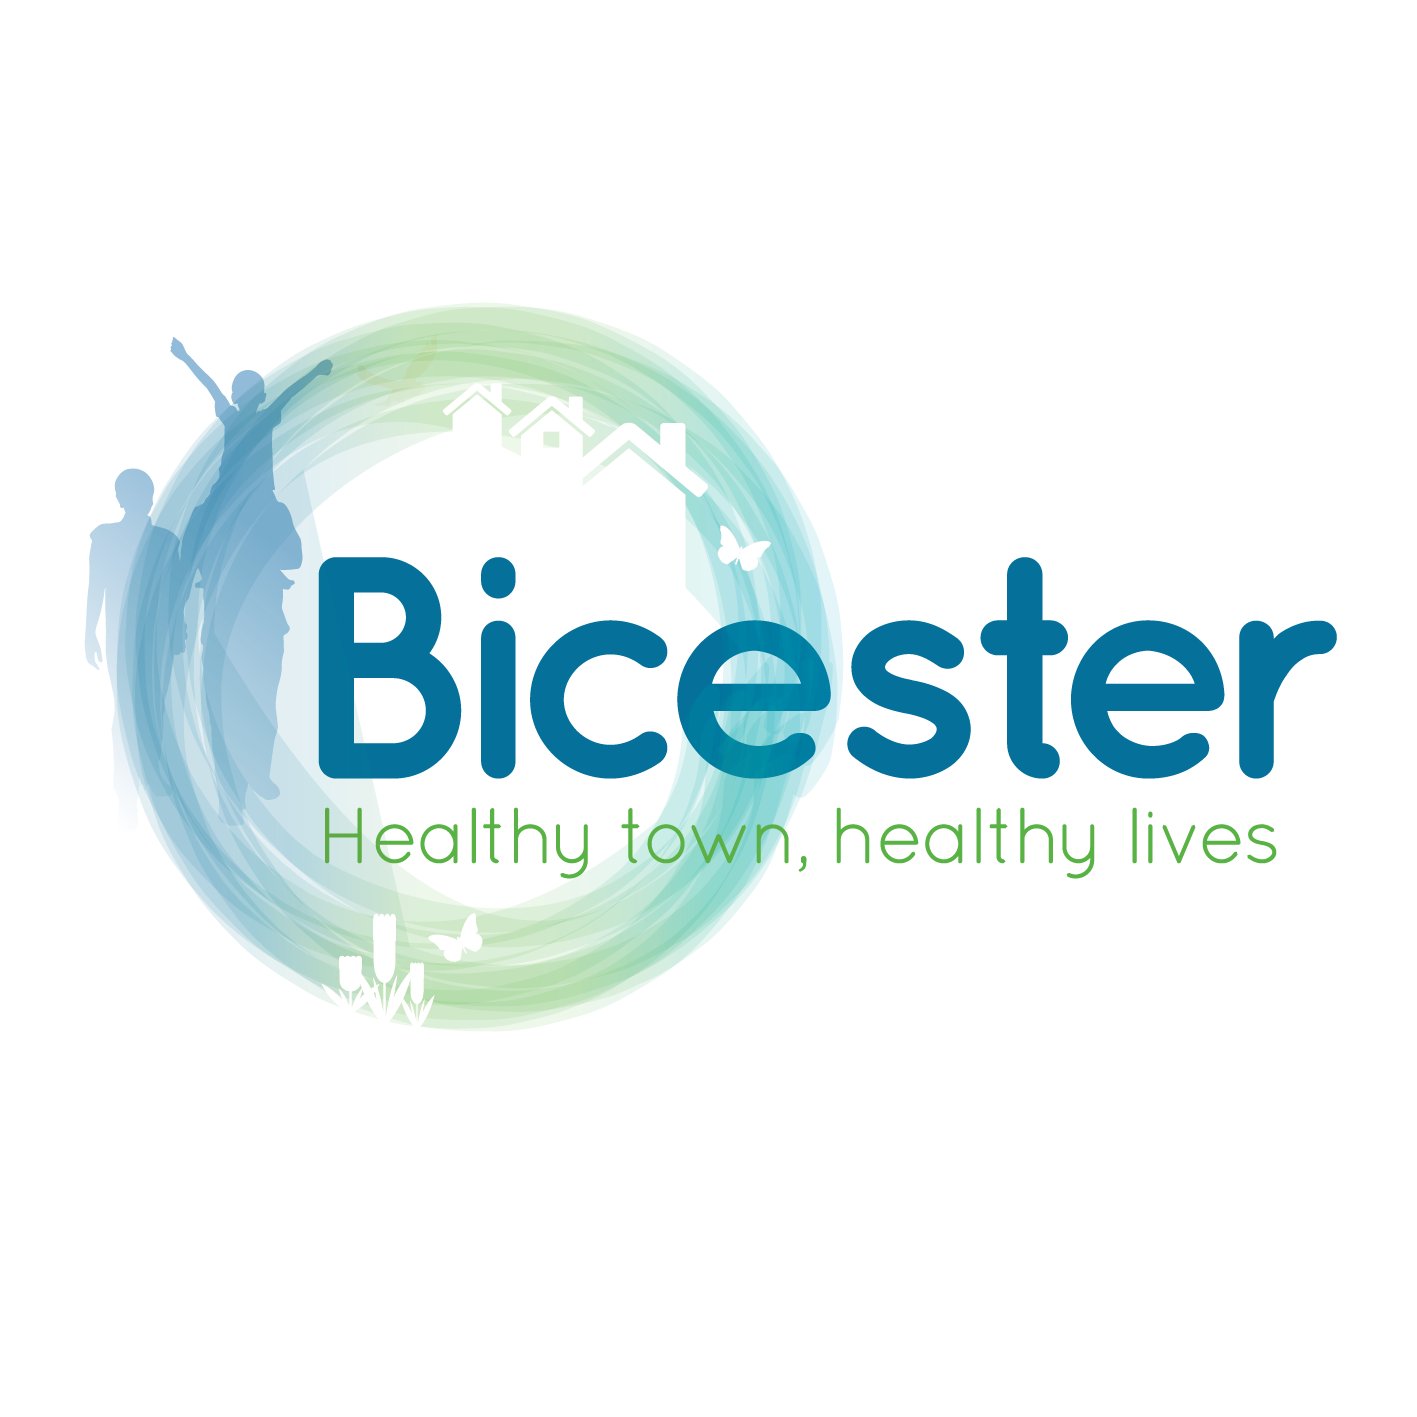 The #HealthyNewTowns #HNT programme to make #Bicester a healthier place to live, work and play.